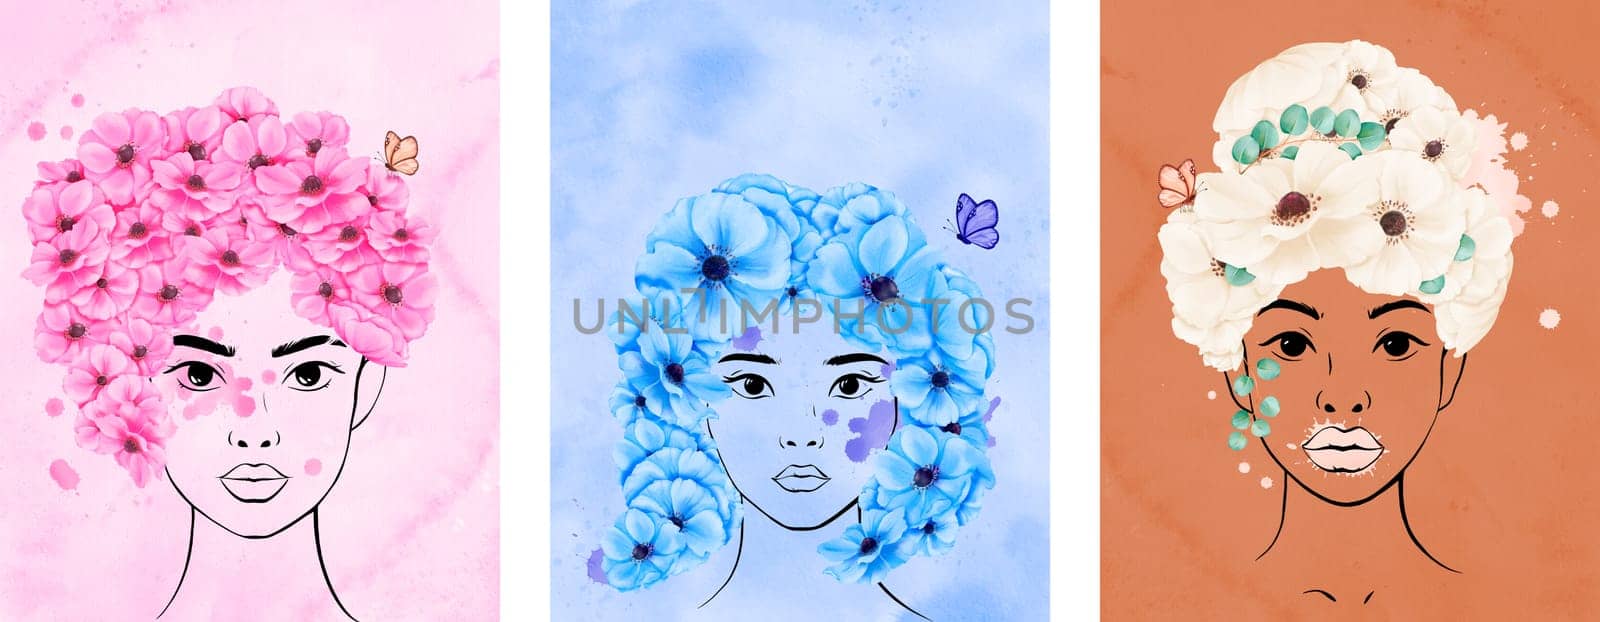 a collection of posters portraying the diversity and beauty of women. Each poster showcases hair adorned with anemone blooms with butterflies and delicate watercolor splashes.